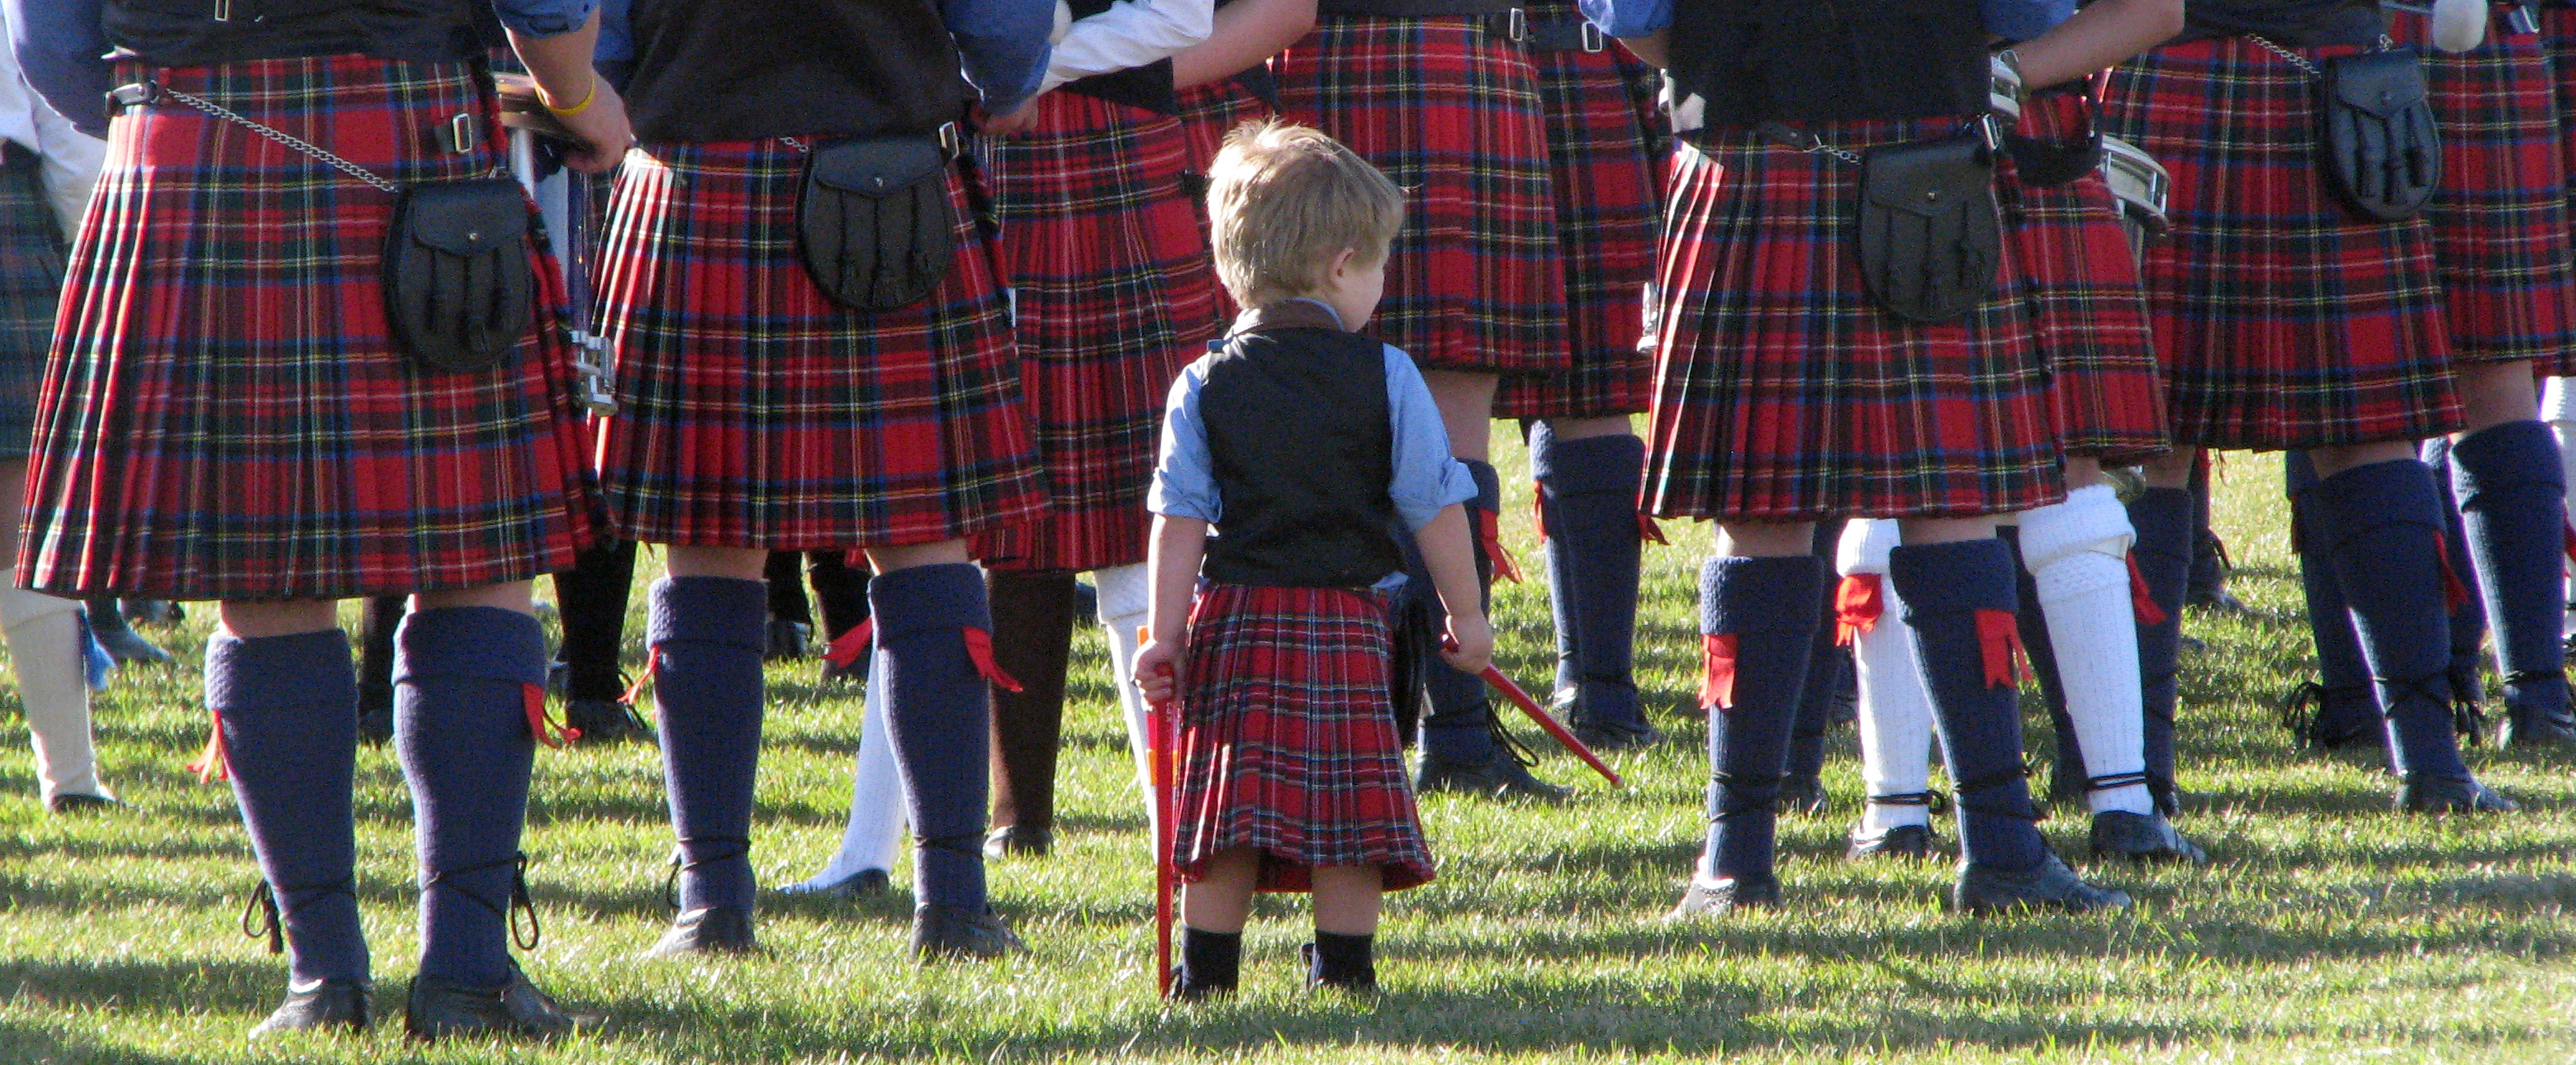 wee-lad-in-a-kilt-calgary-highland-games